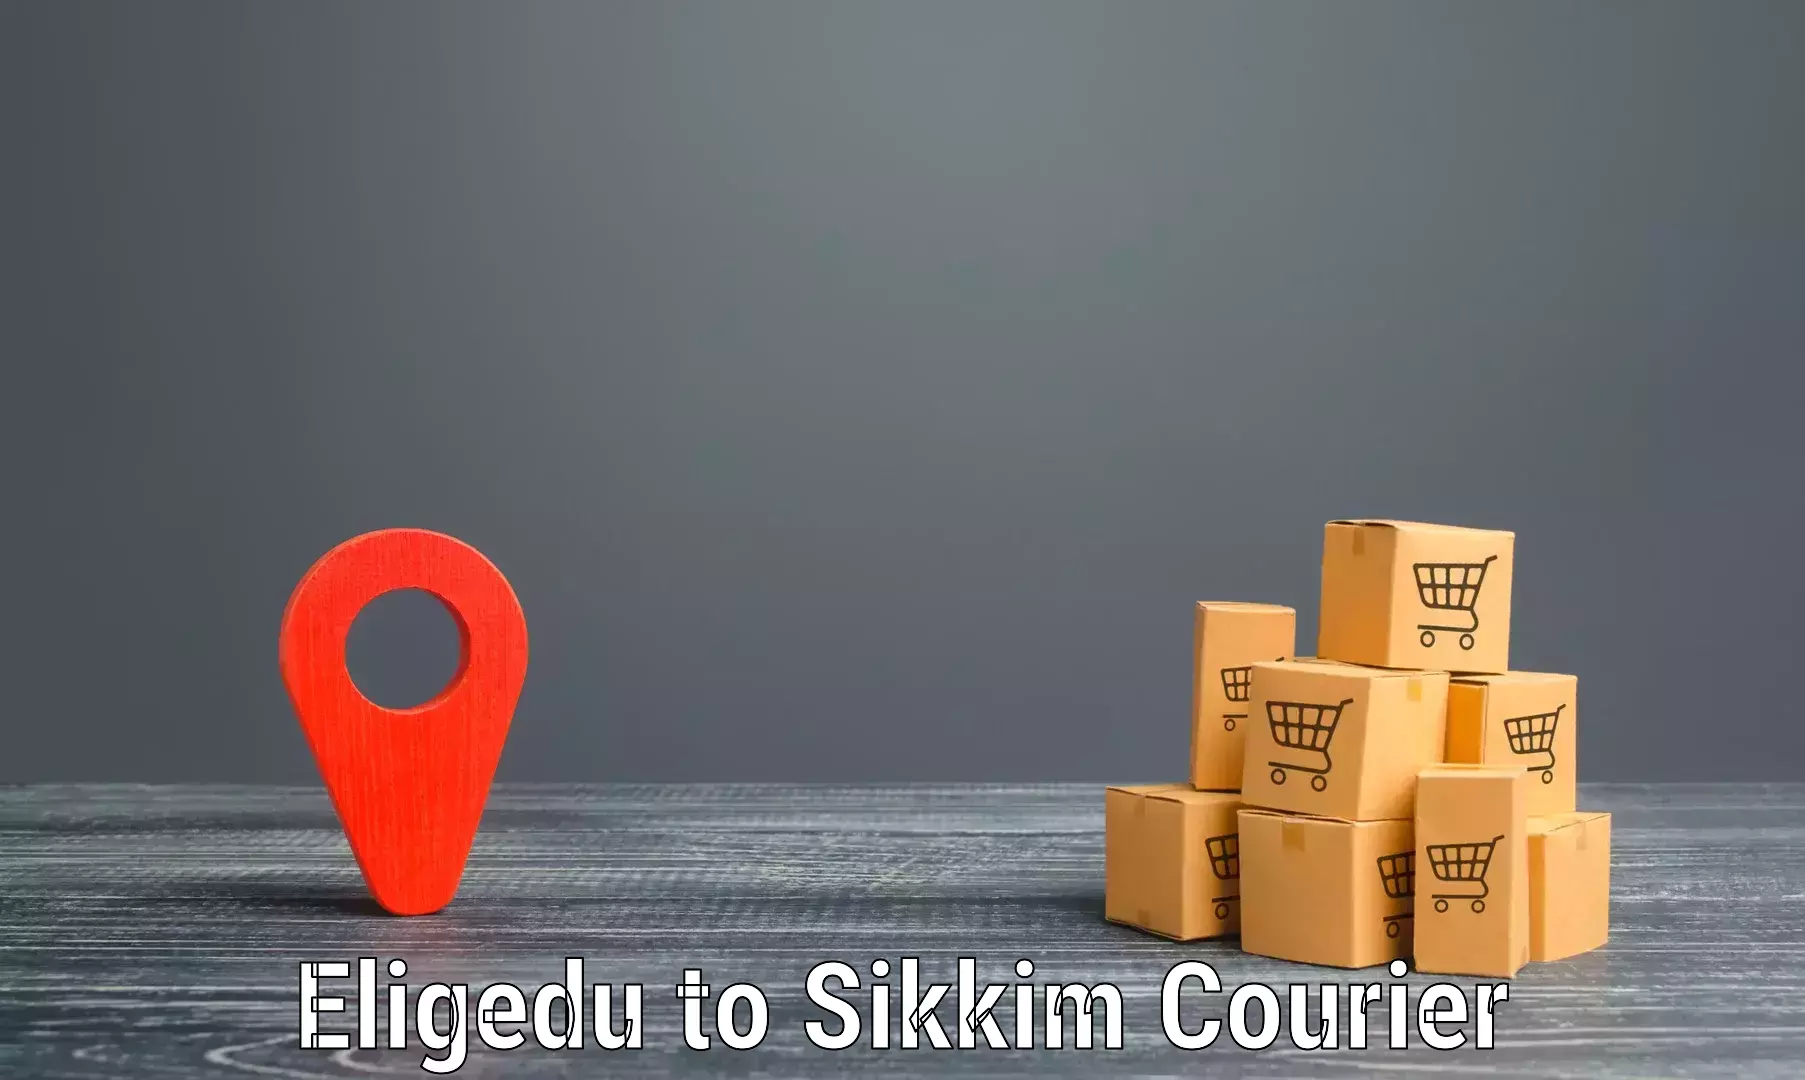 24/7 courier service Eligedu to Rangpo